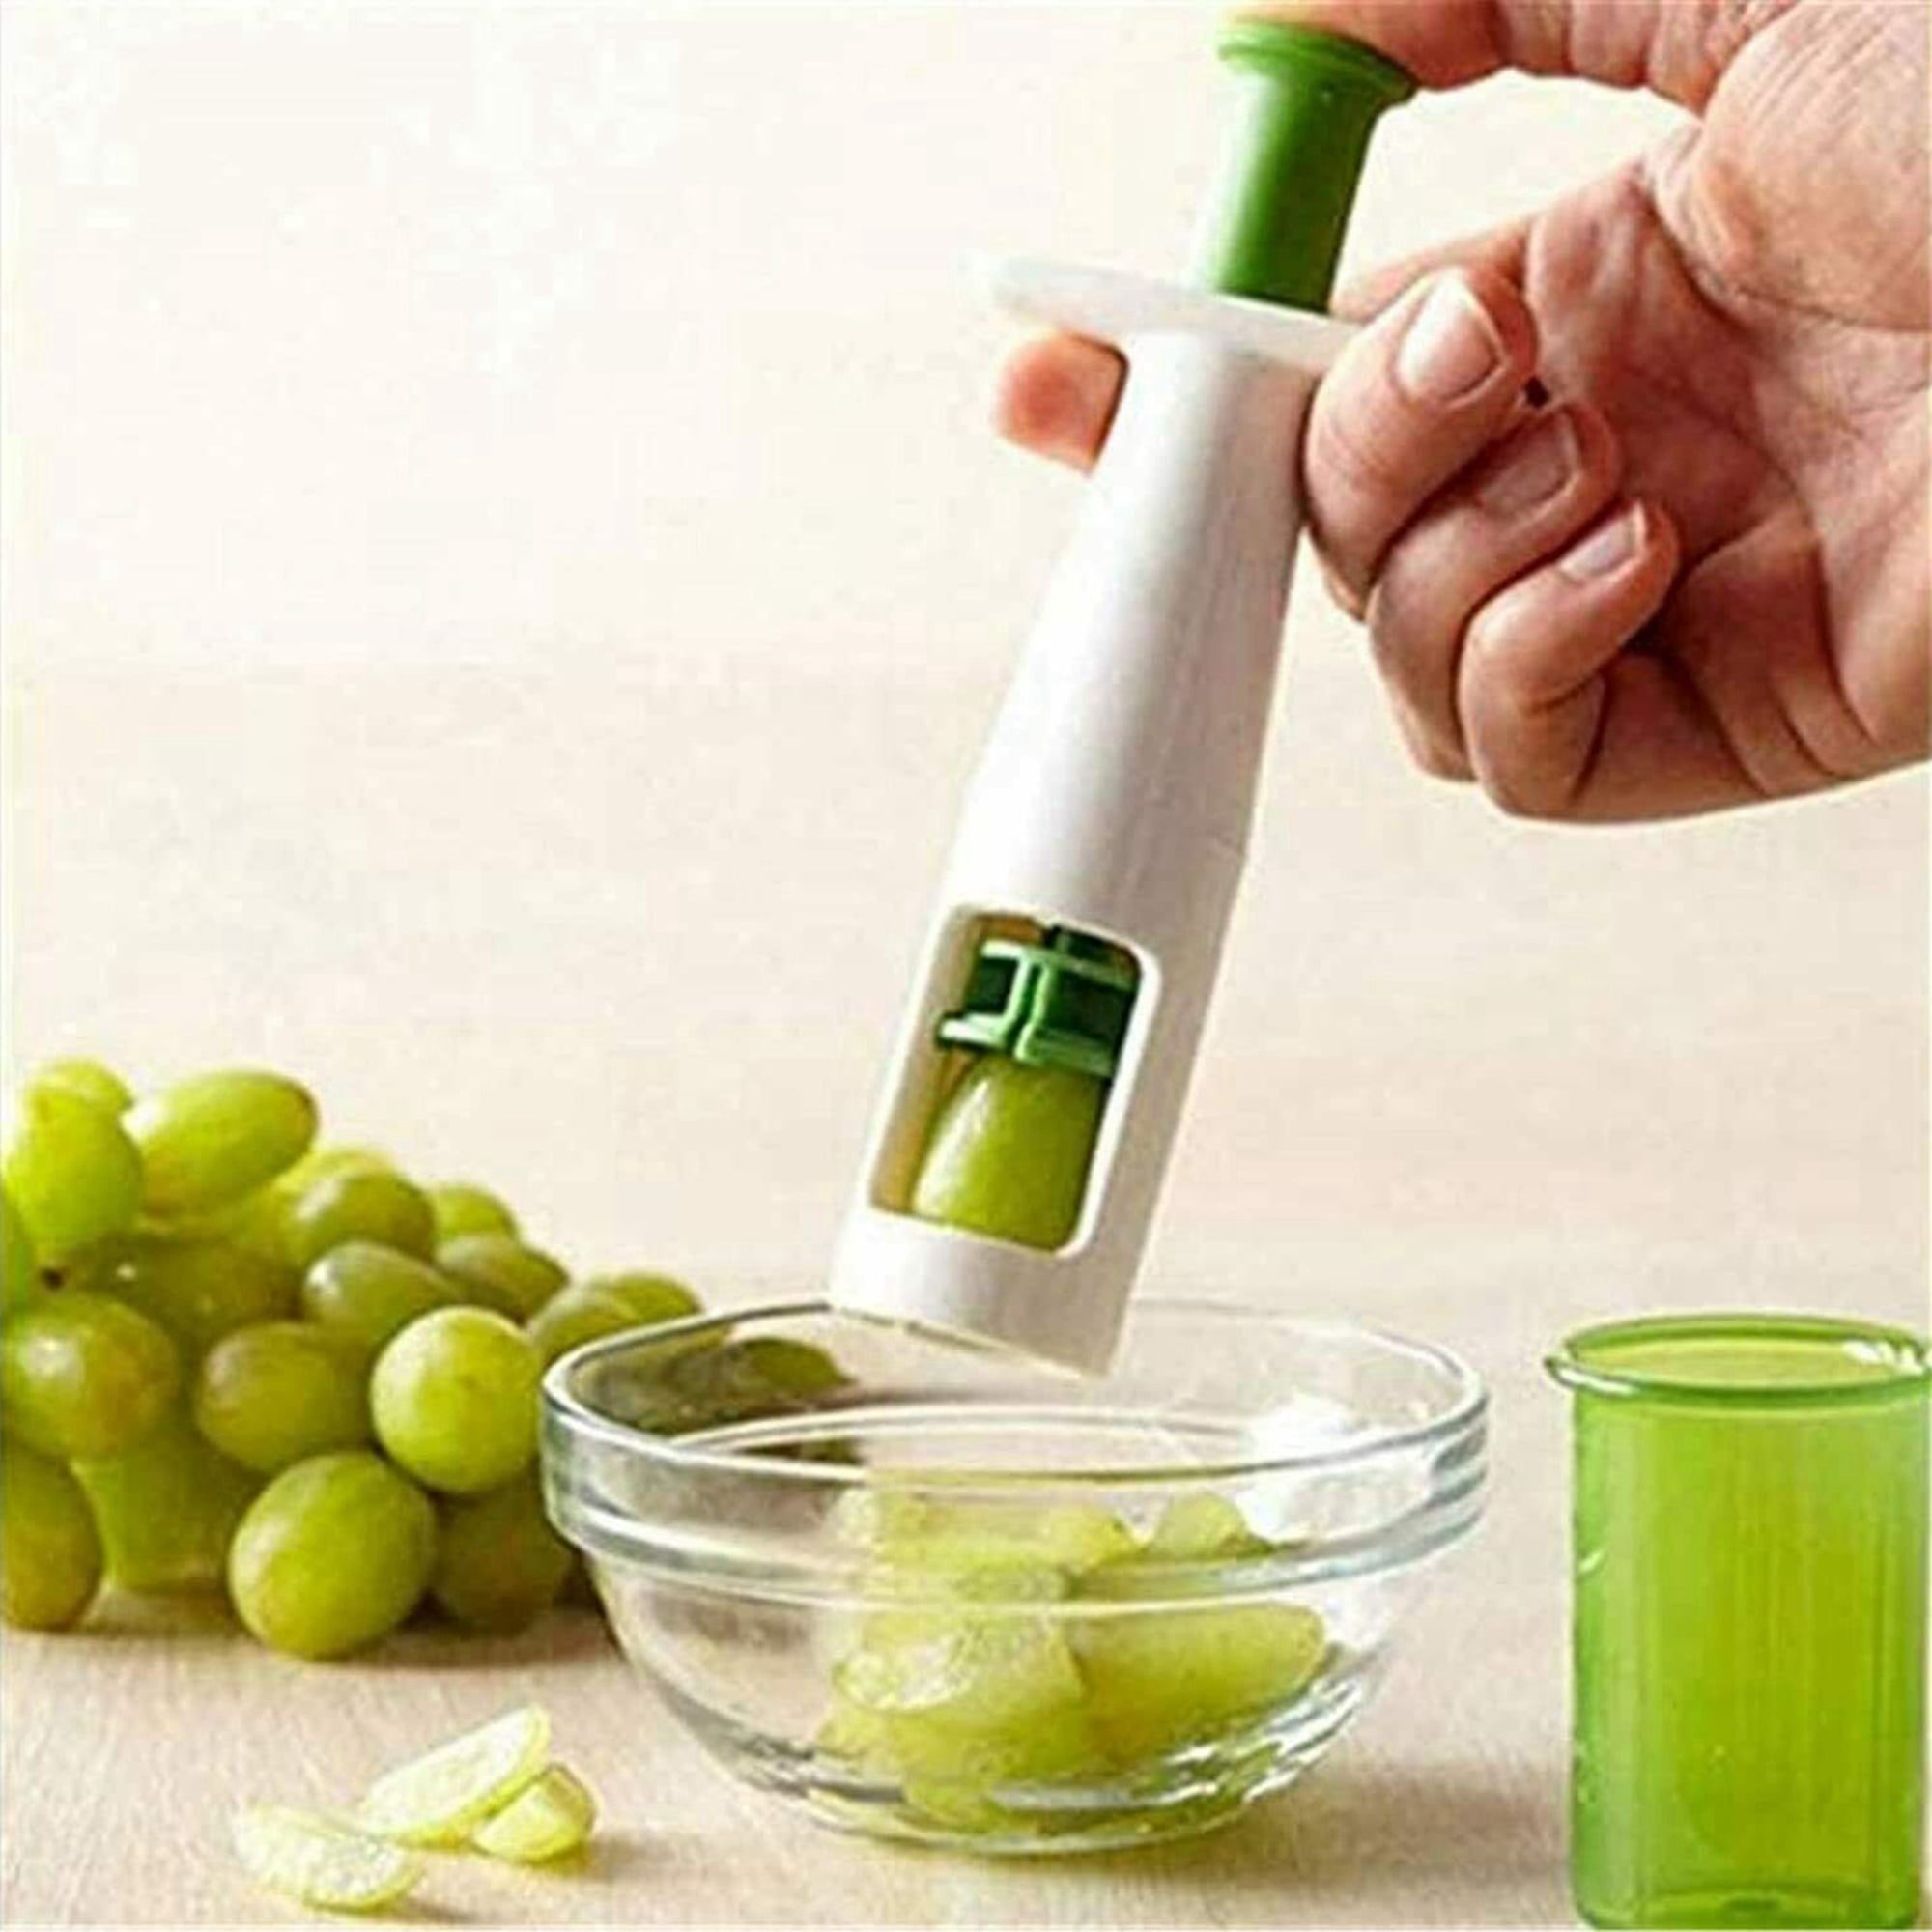  HERLLY Grape Slicer,Daily Fruit and Veggie Divider,Fruit  Cutters with Stainless Steel Blades,Grape Cutter for Baby Supplement  (Green): Home & Kitchen